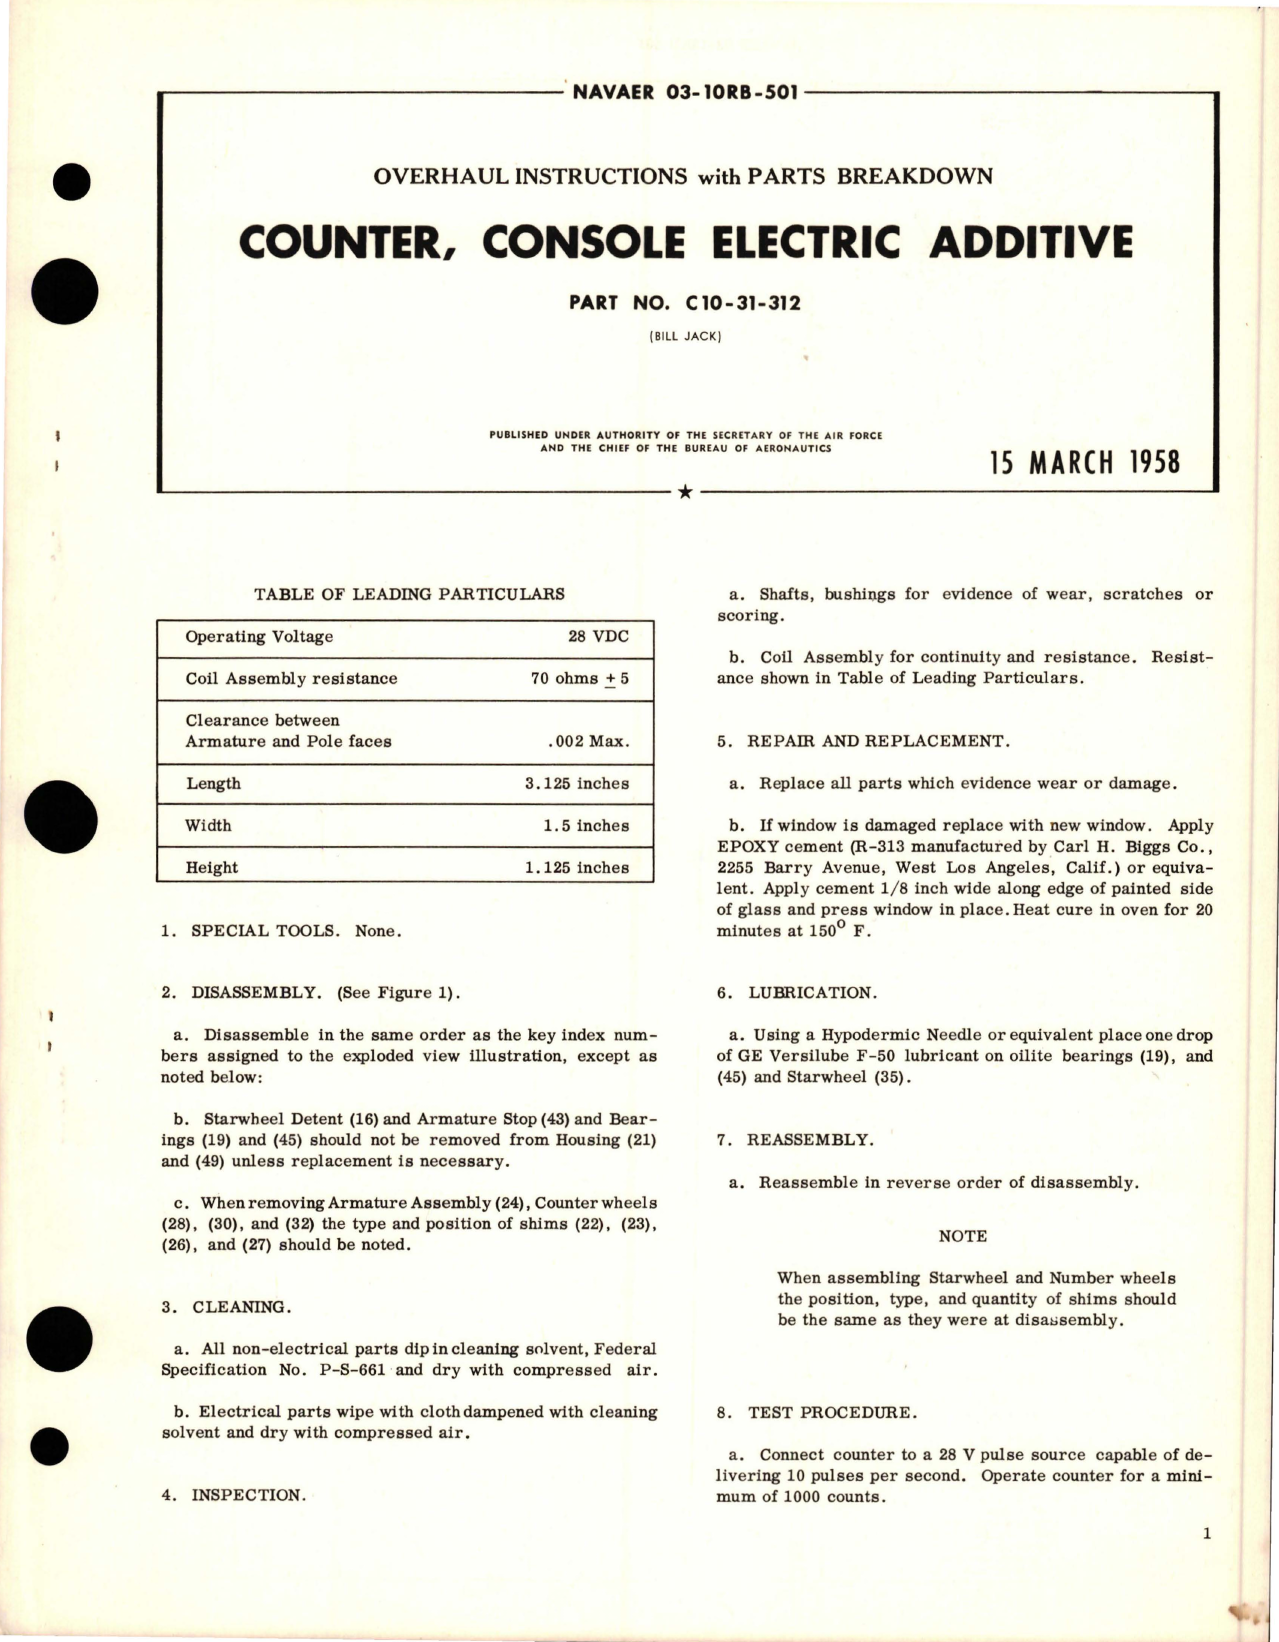 Sample page 1 from AirCorps Library document: Overhaul Instructions with Parts for Console Electric Additive Counter - Part C10-31-312